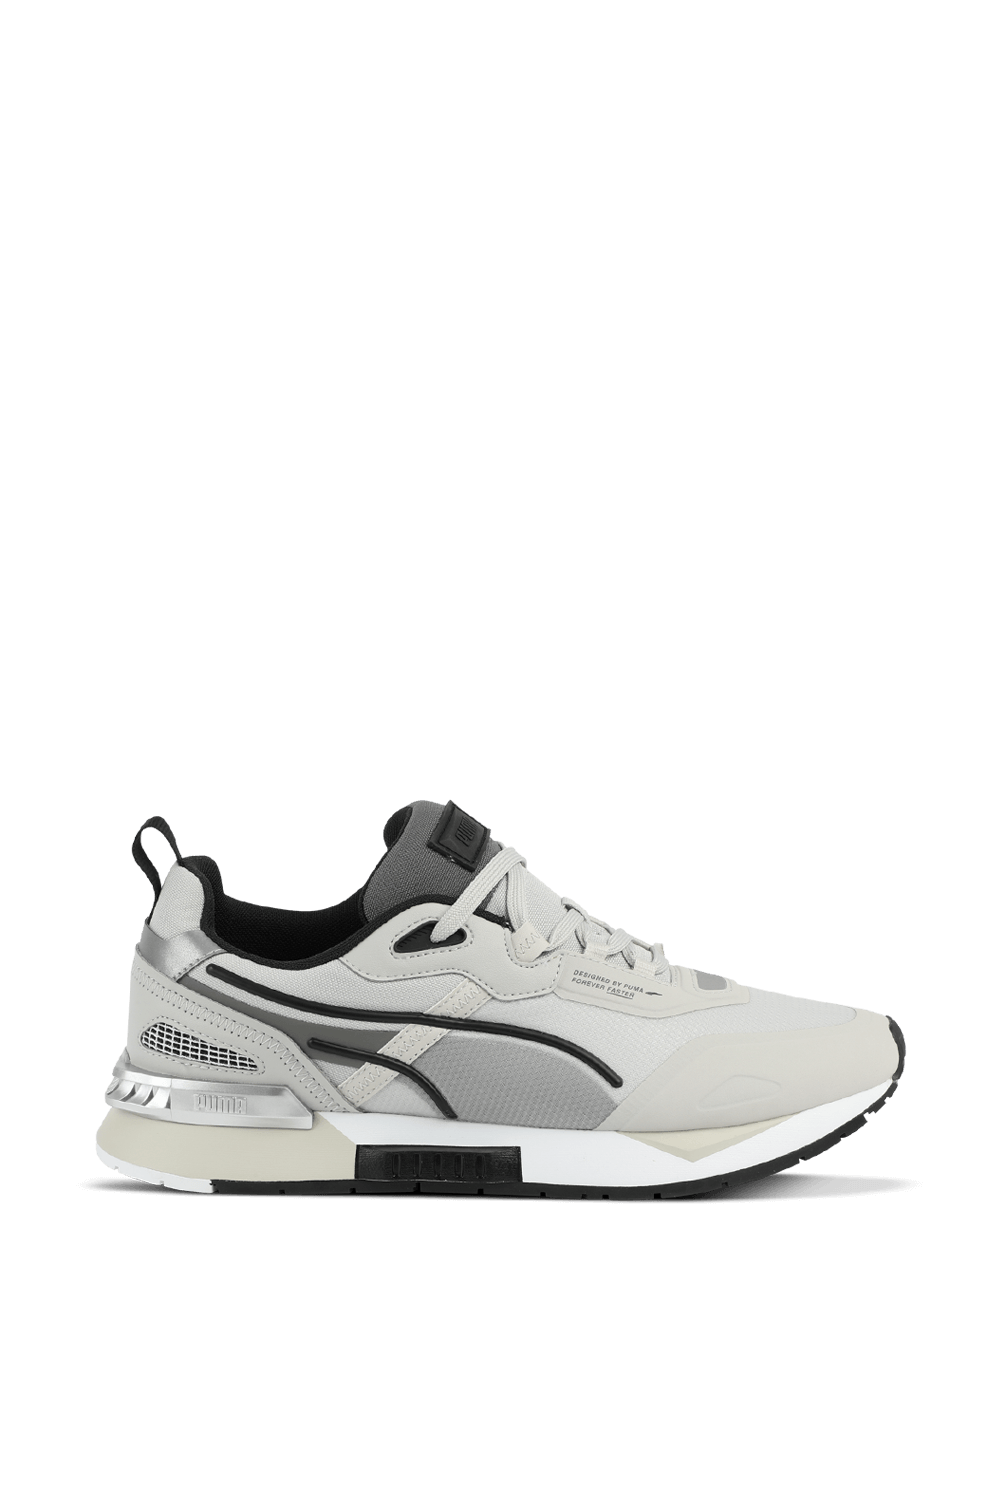 Mirage Tech Core Sneakers in Grey and Black PUMA